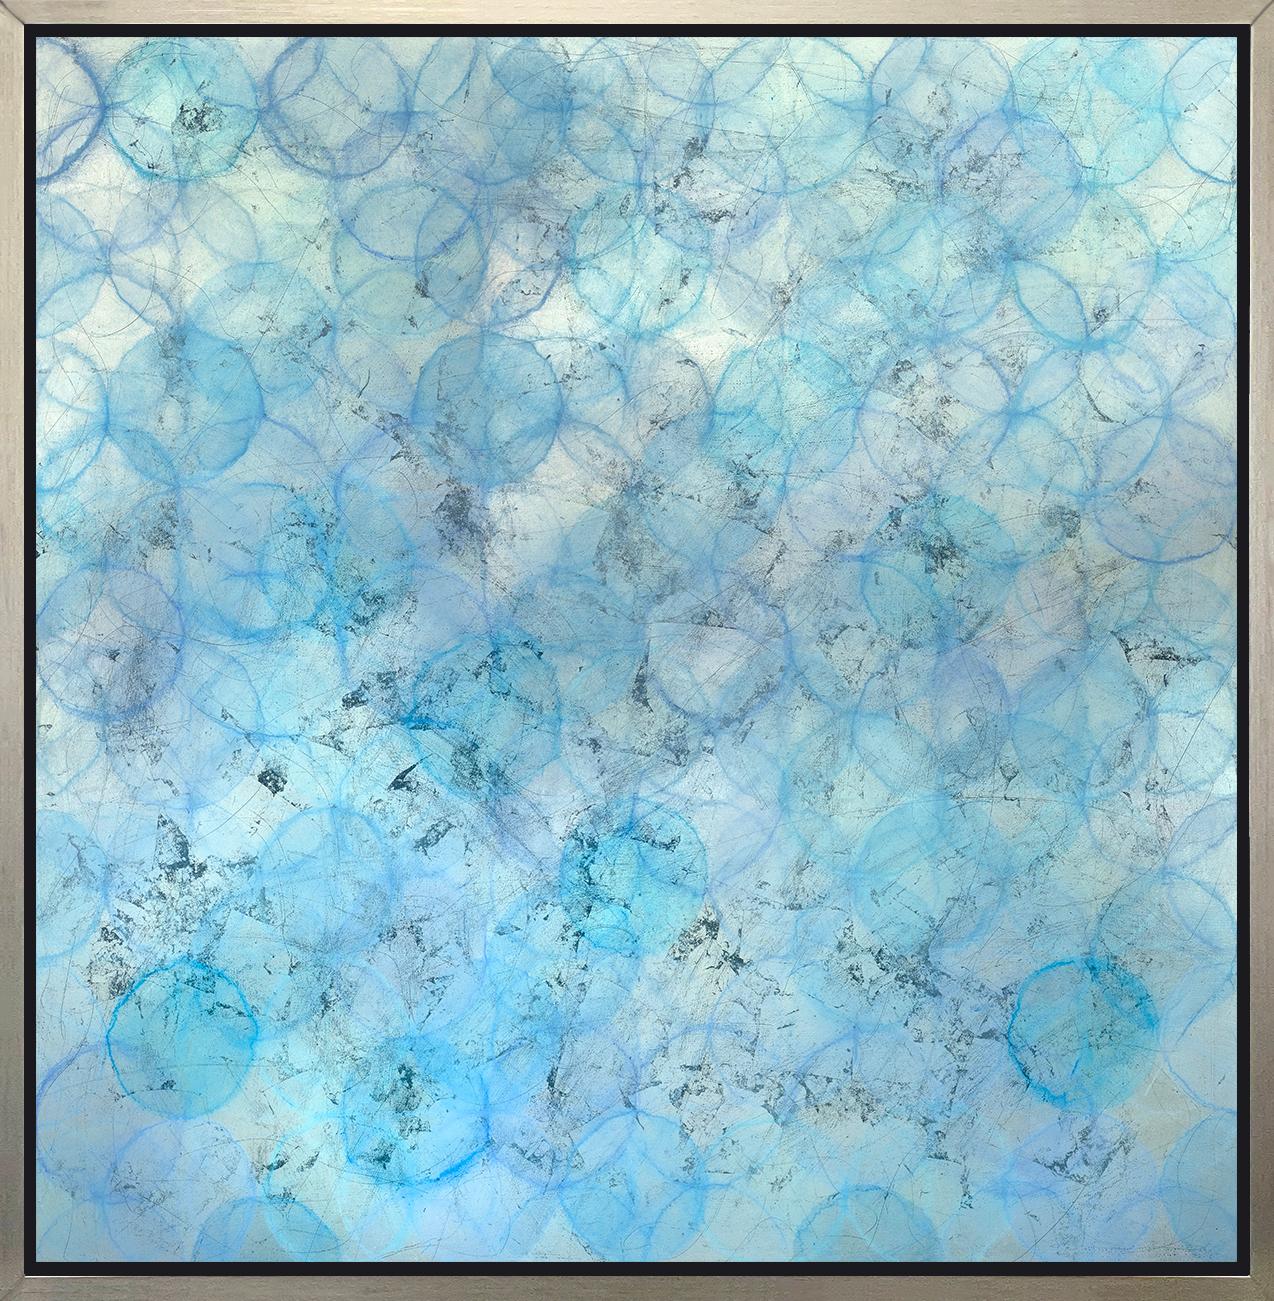 Roger Mudre Abstract Print - "Brunnera, " Framed Limited Edition Giclee Print, 48" x 48"